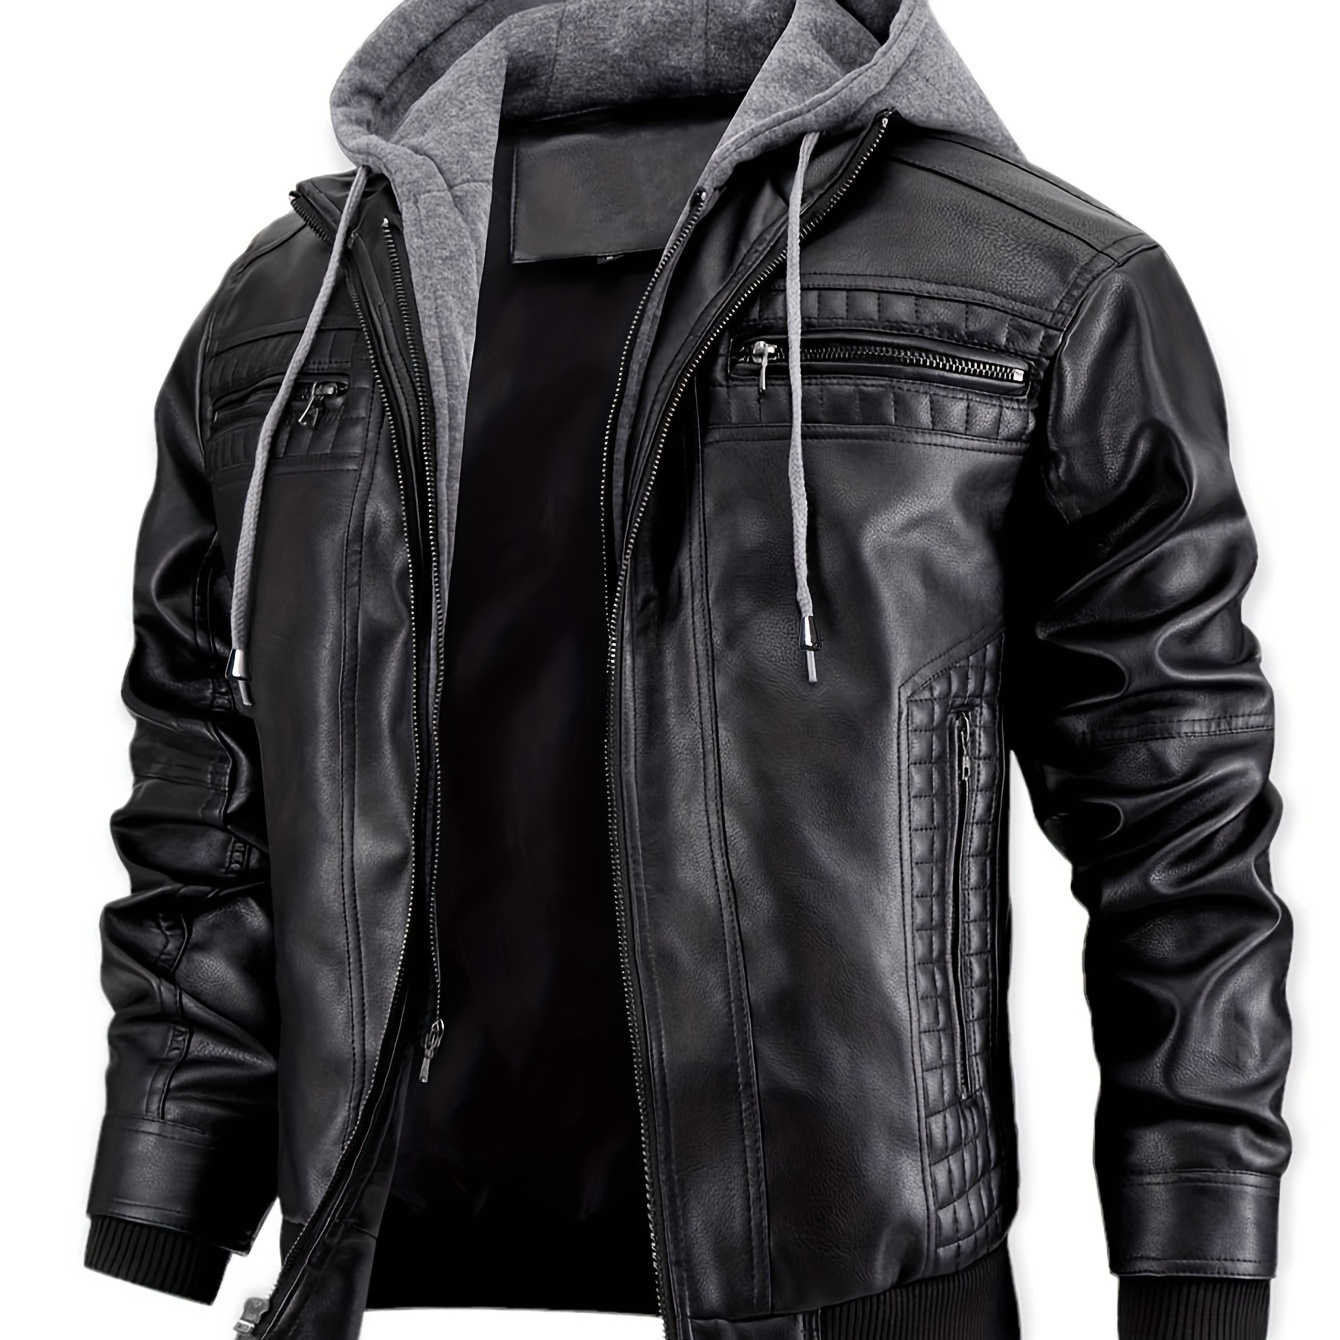 

Men's Casual 2 In 1 Pu Leather Jacket, Chic Bomber Jacket Biker Jacket With Zipper Pockets